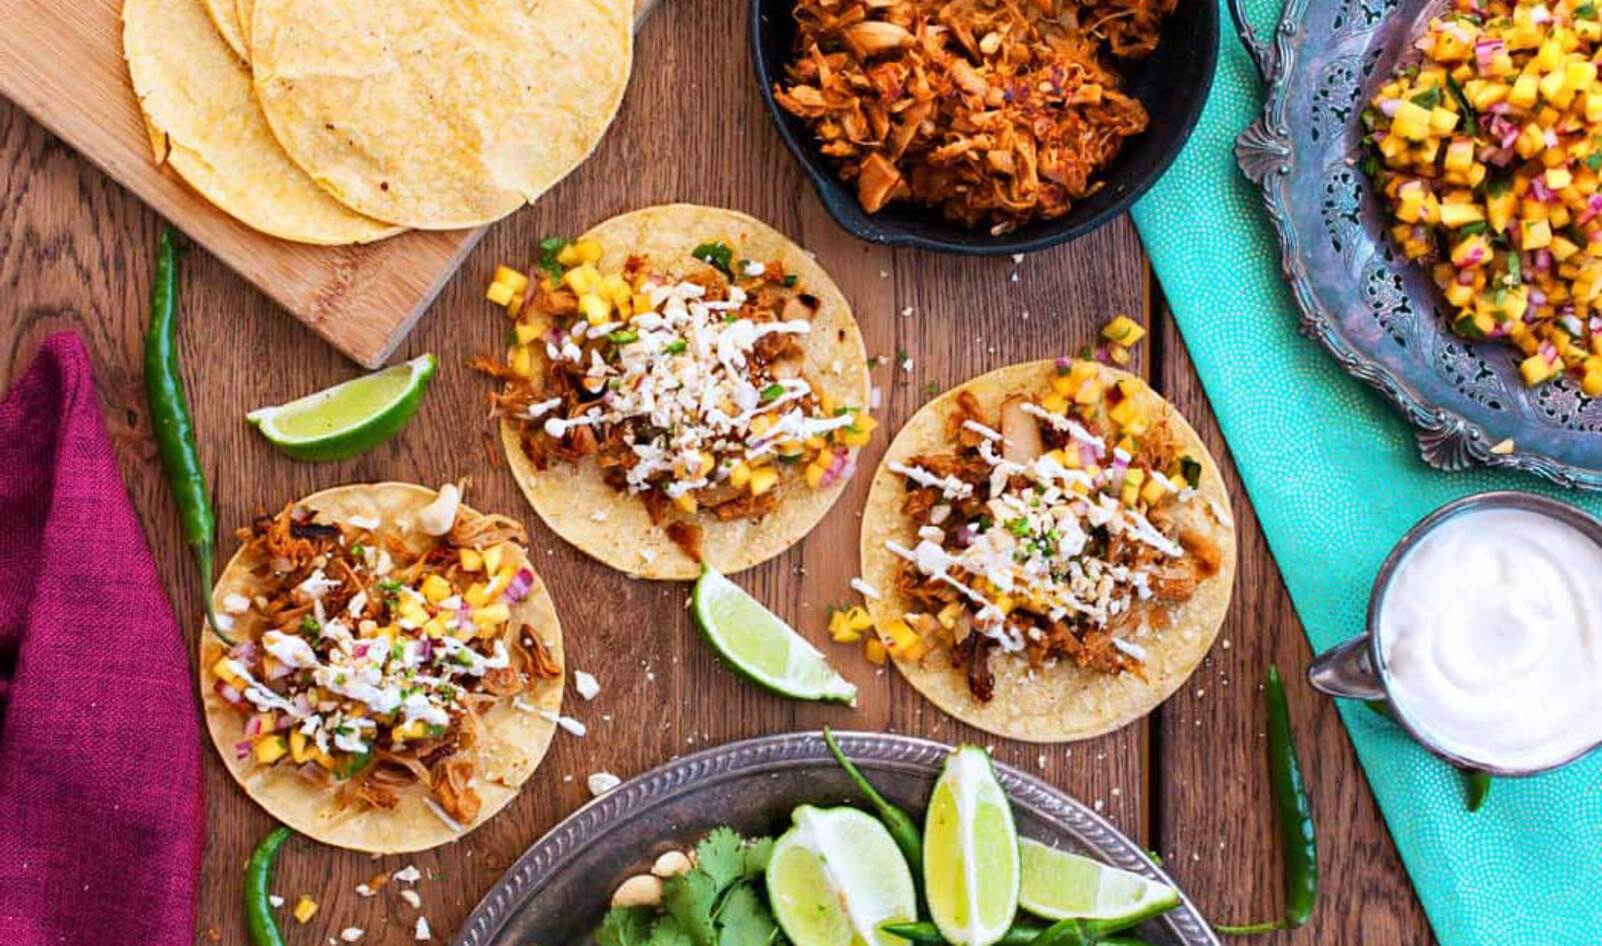 How to Build the Ultimate Vegan Taco